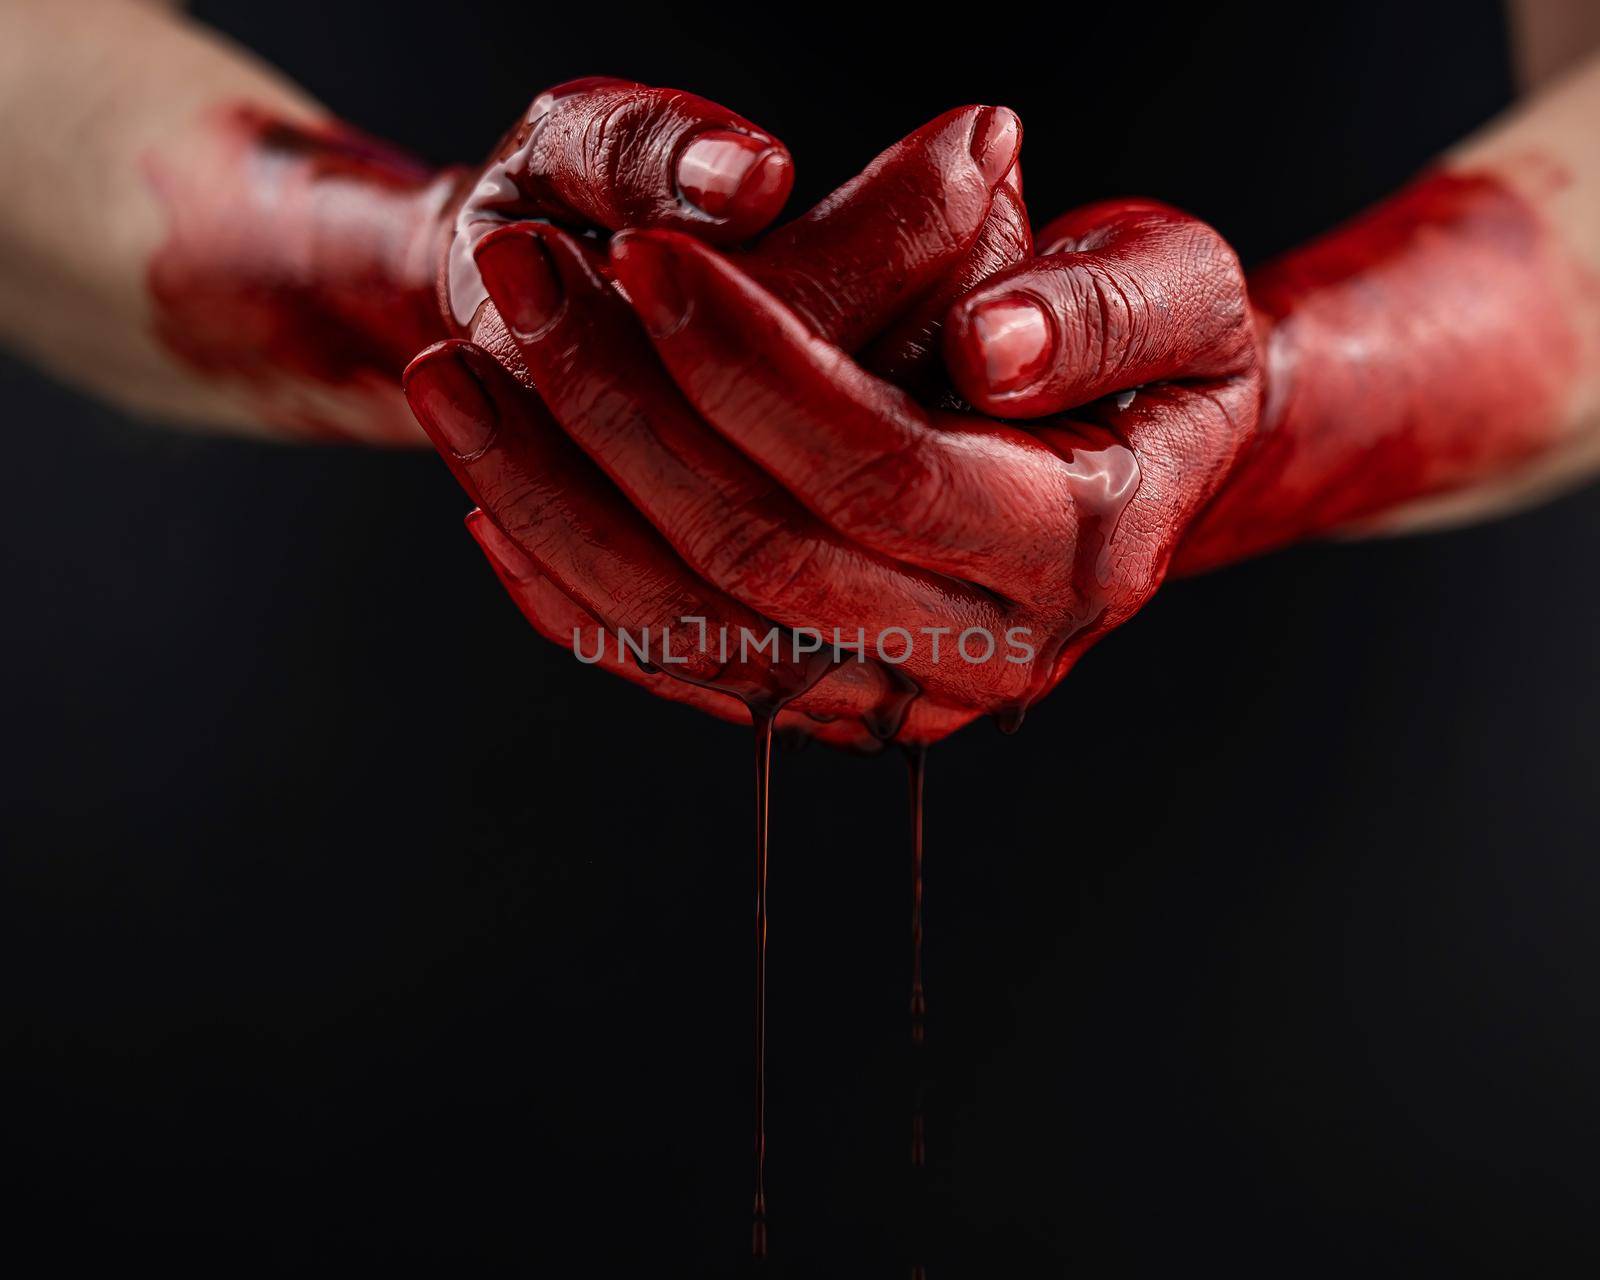 Woman holding blood-stained palms together on black background. by mrwed54